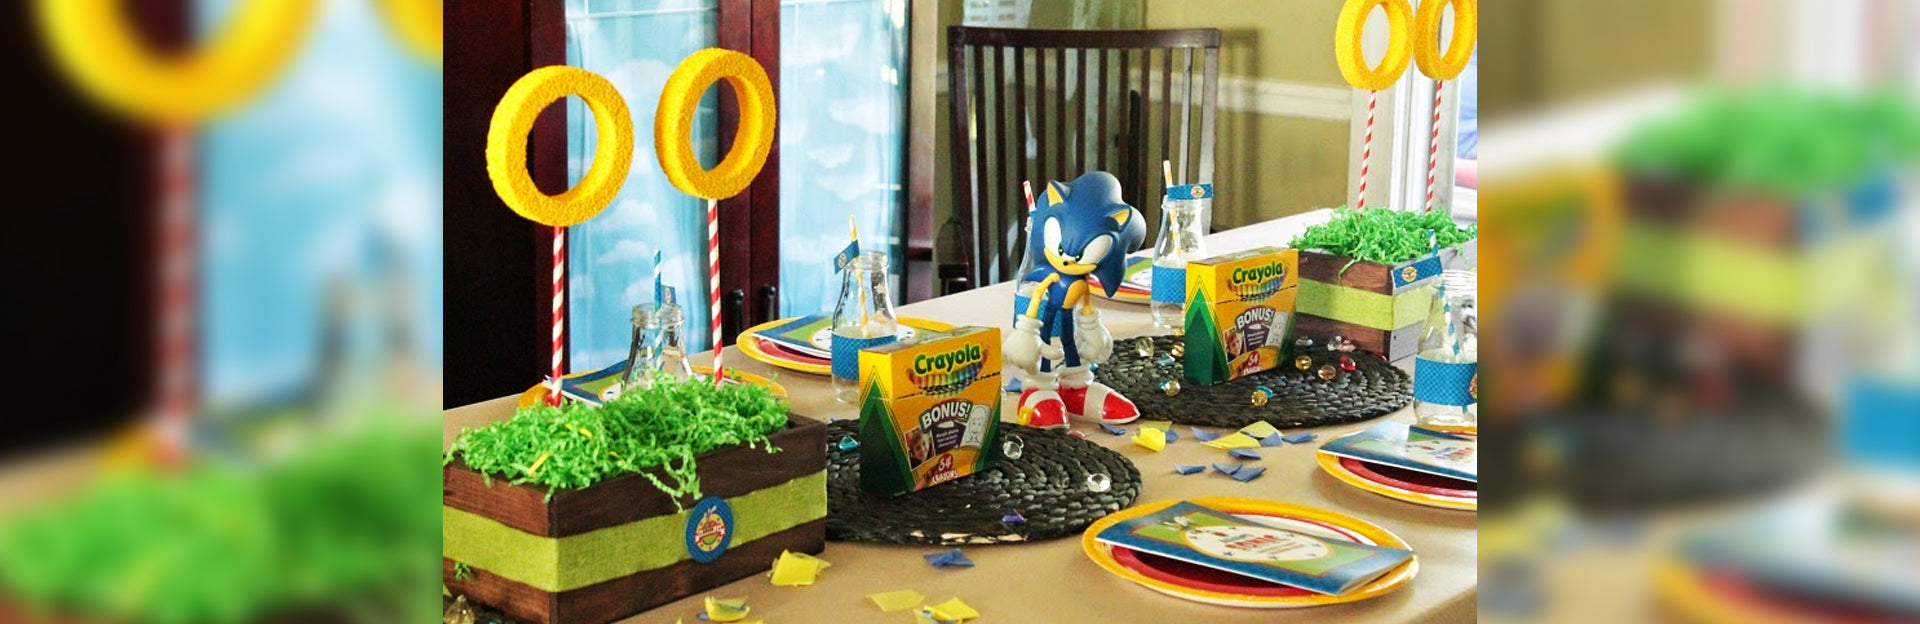 DIY Sonic the Hedgehog Birthday Party Decoration Ideas I @ Kids Town Indoor  Playground 